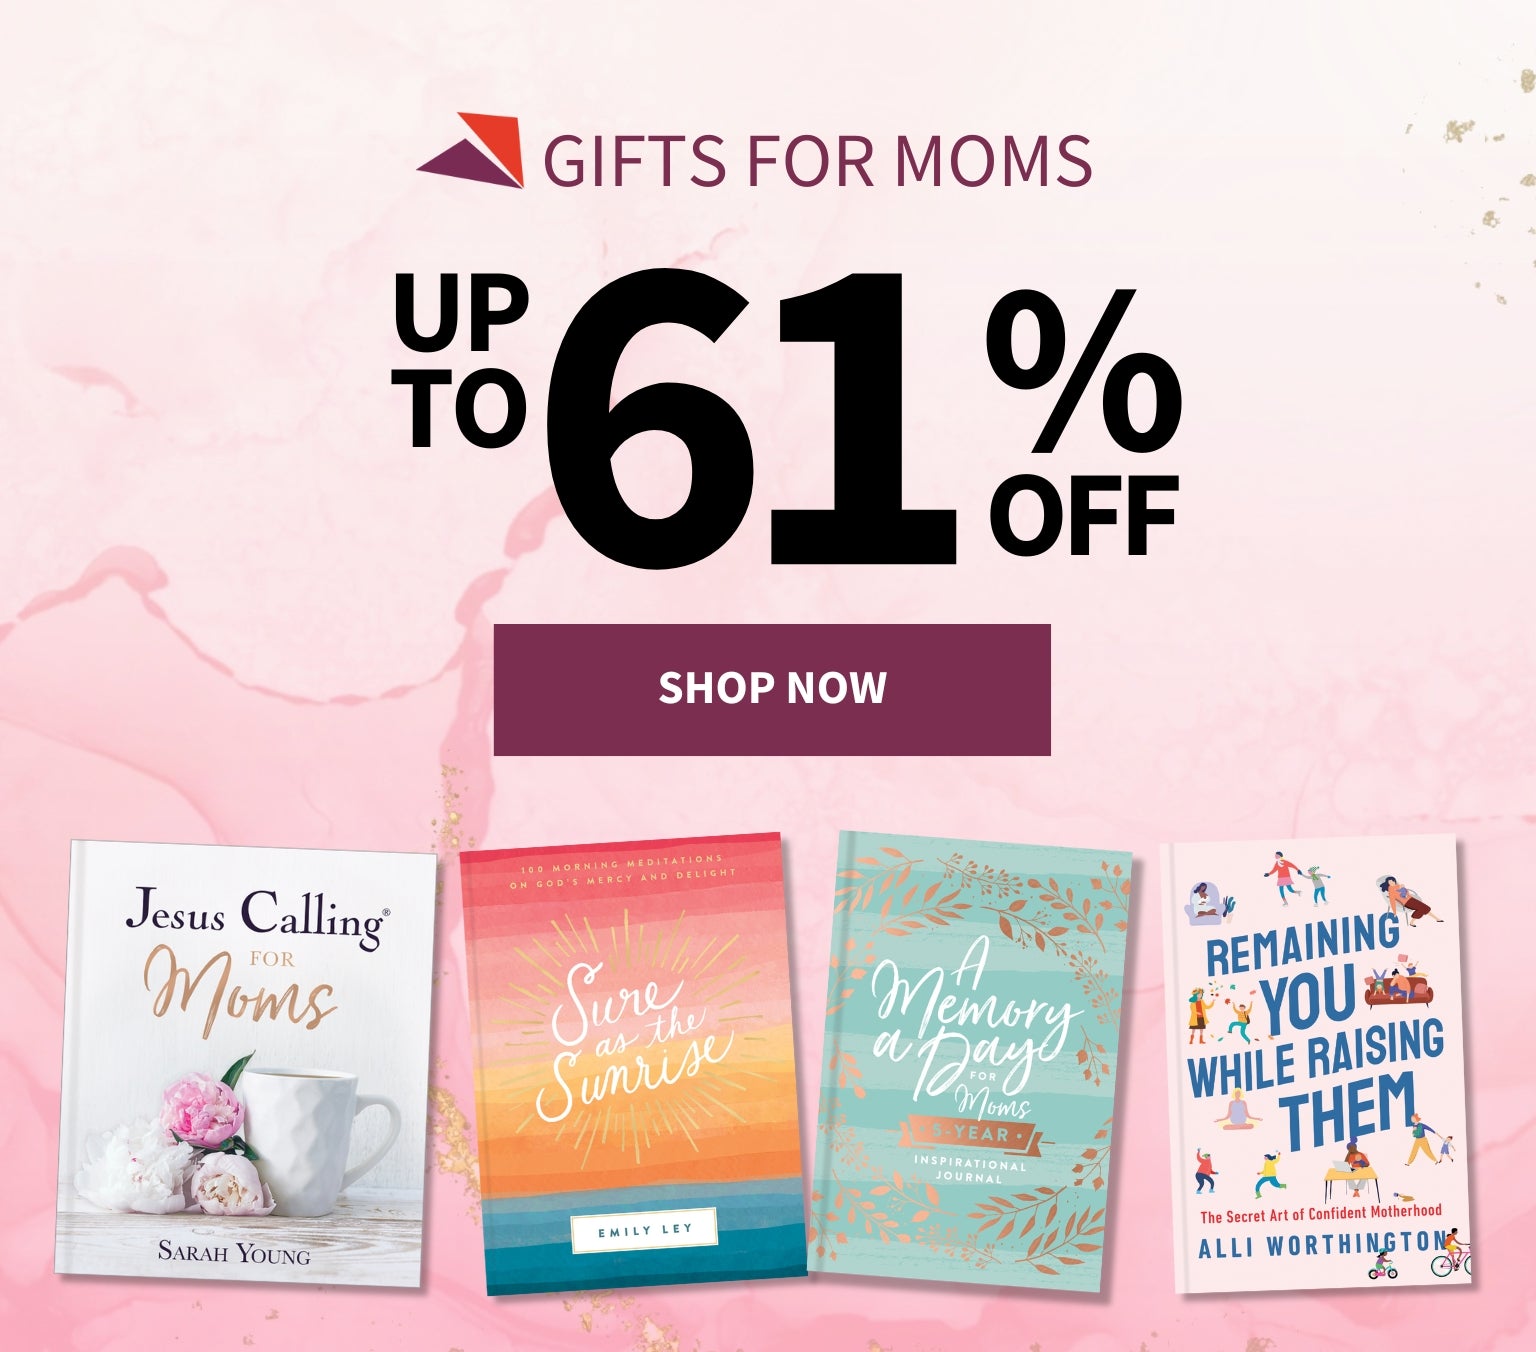 Gifts for Moms Up To 61% Off